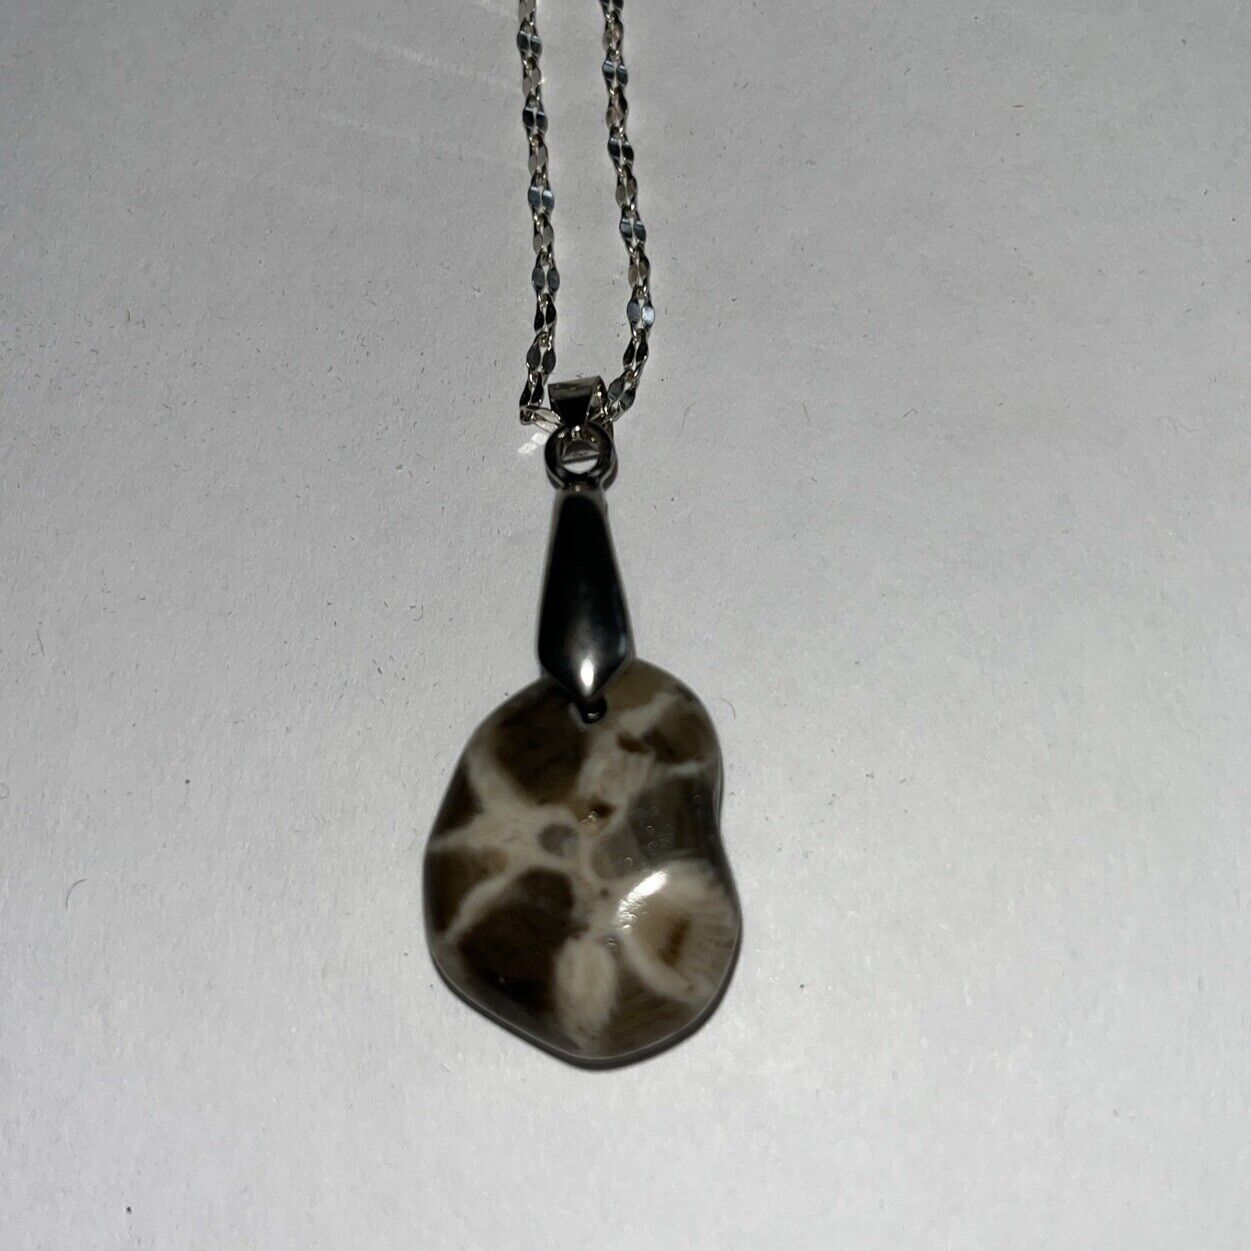 Petoskey Stone Pendant .925 Silver Necklace Michigan Polished Coral Fossil